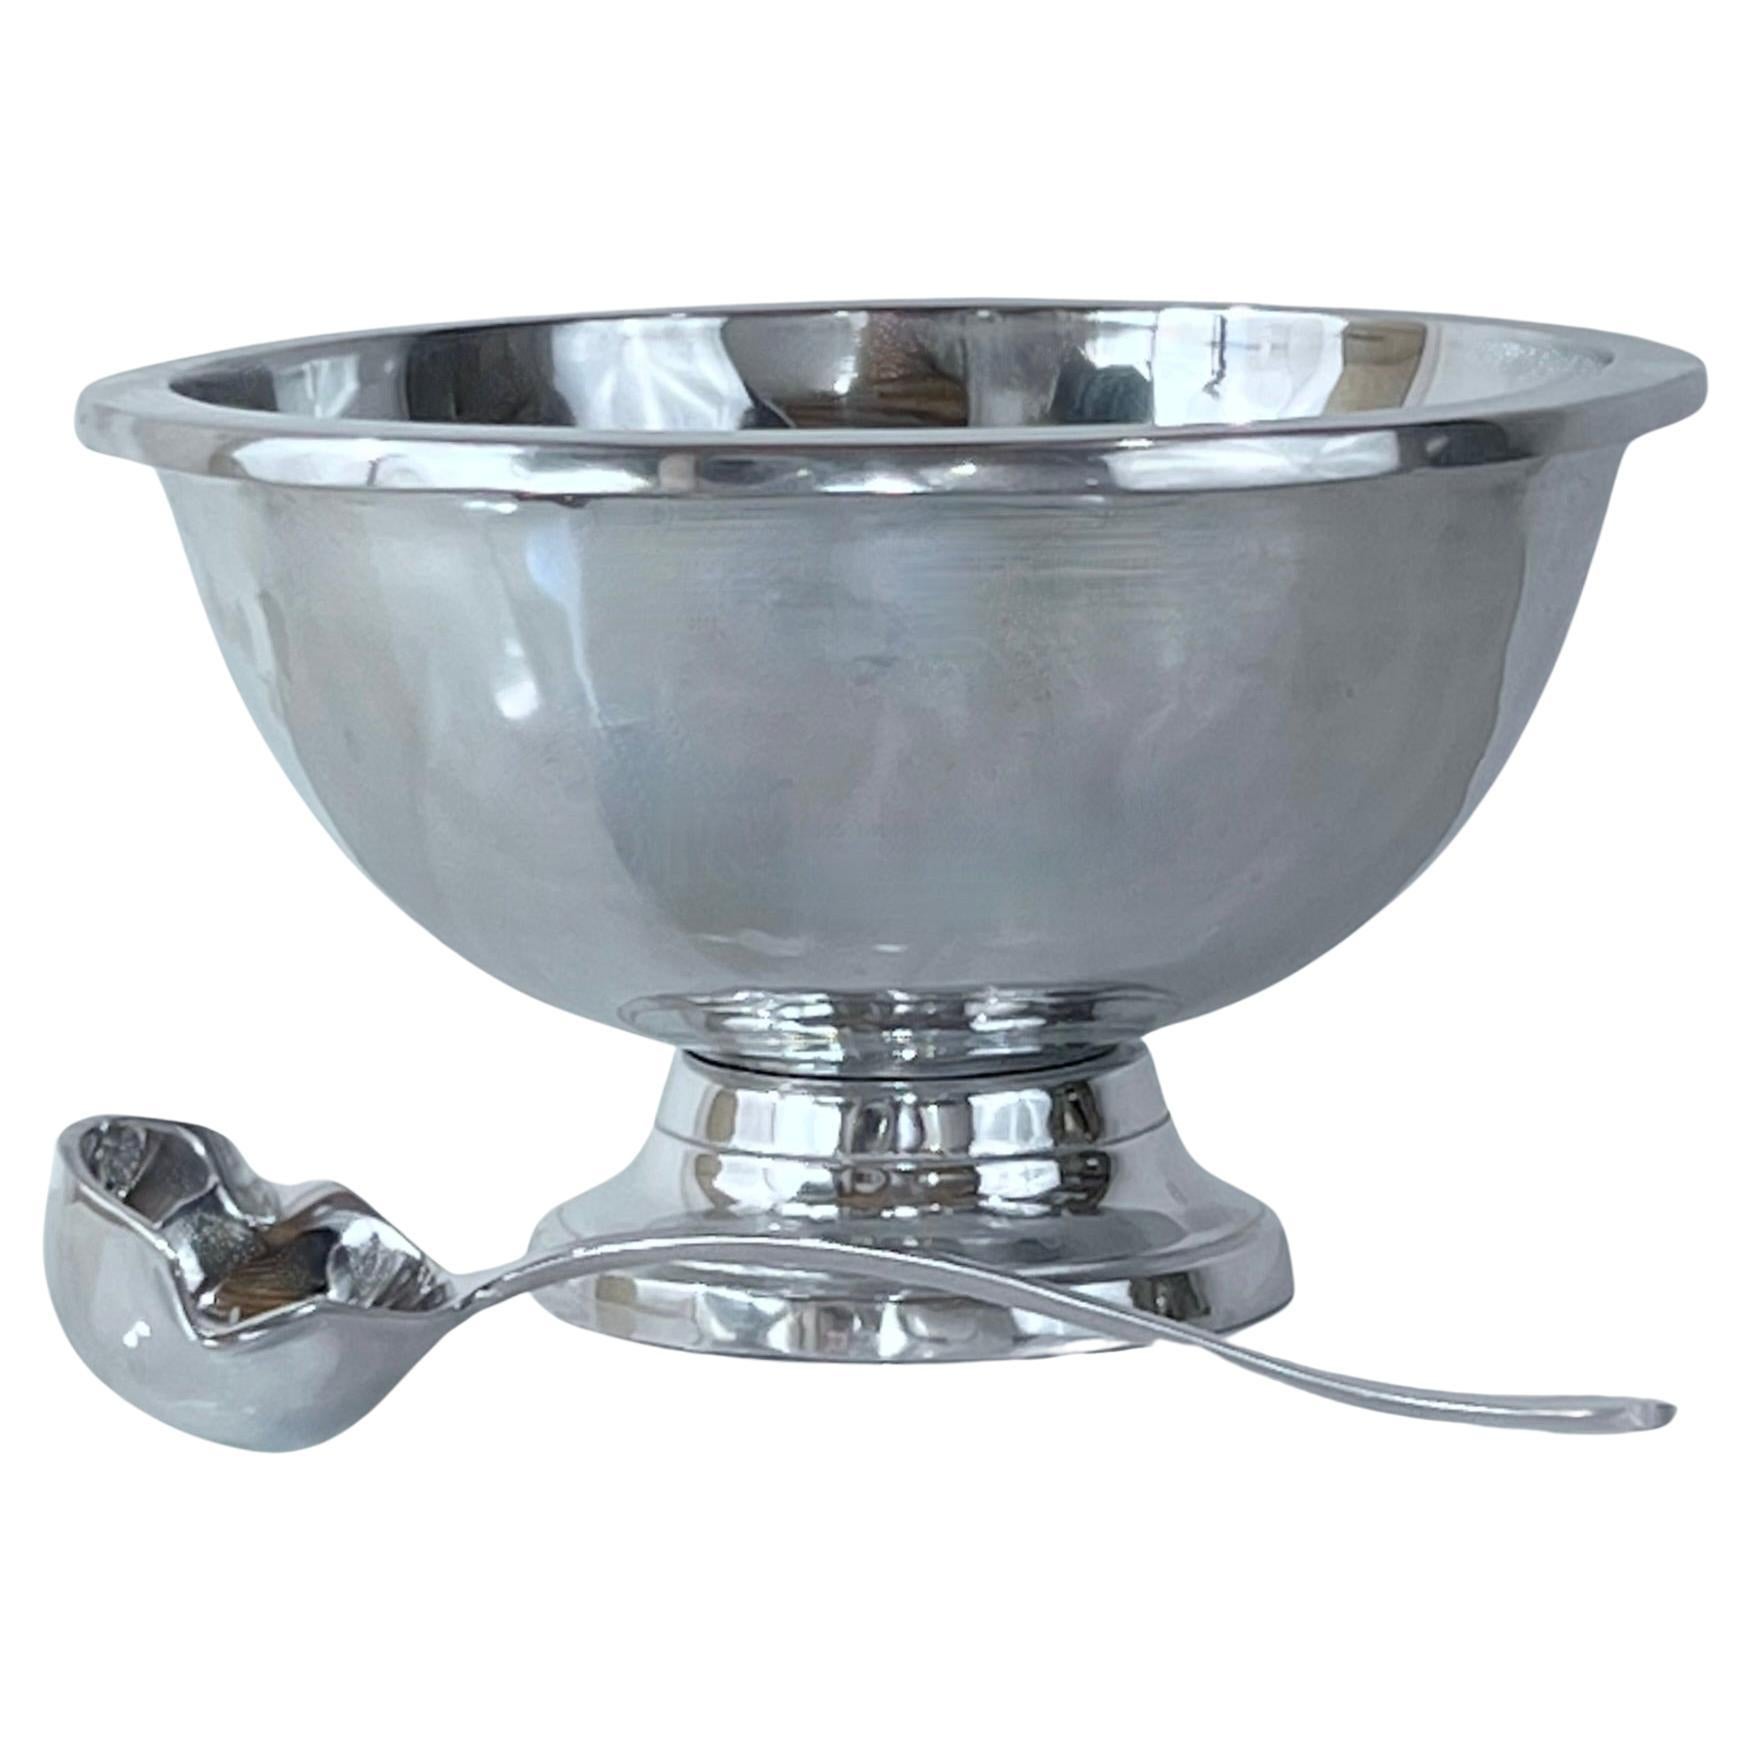 Classic and beautiful vintage shiny pewter grand punch bowl/soup tureen. Holds 3 gallons, comes with an 8-ounce ladle. 100% food/beverage safe. The bowl is much larger than the photos make it look.  Perfect for holiday entertaining.

Large -